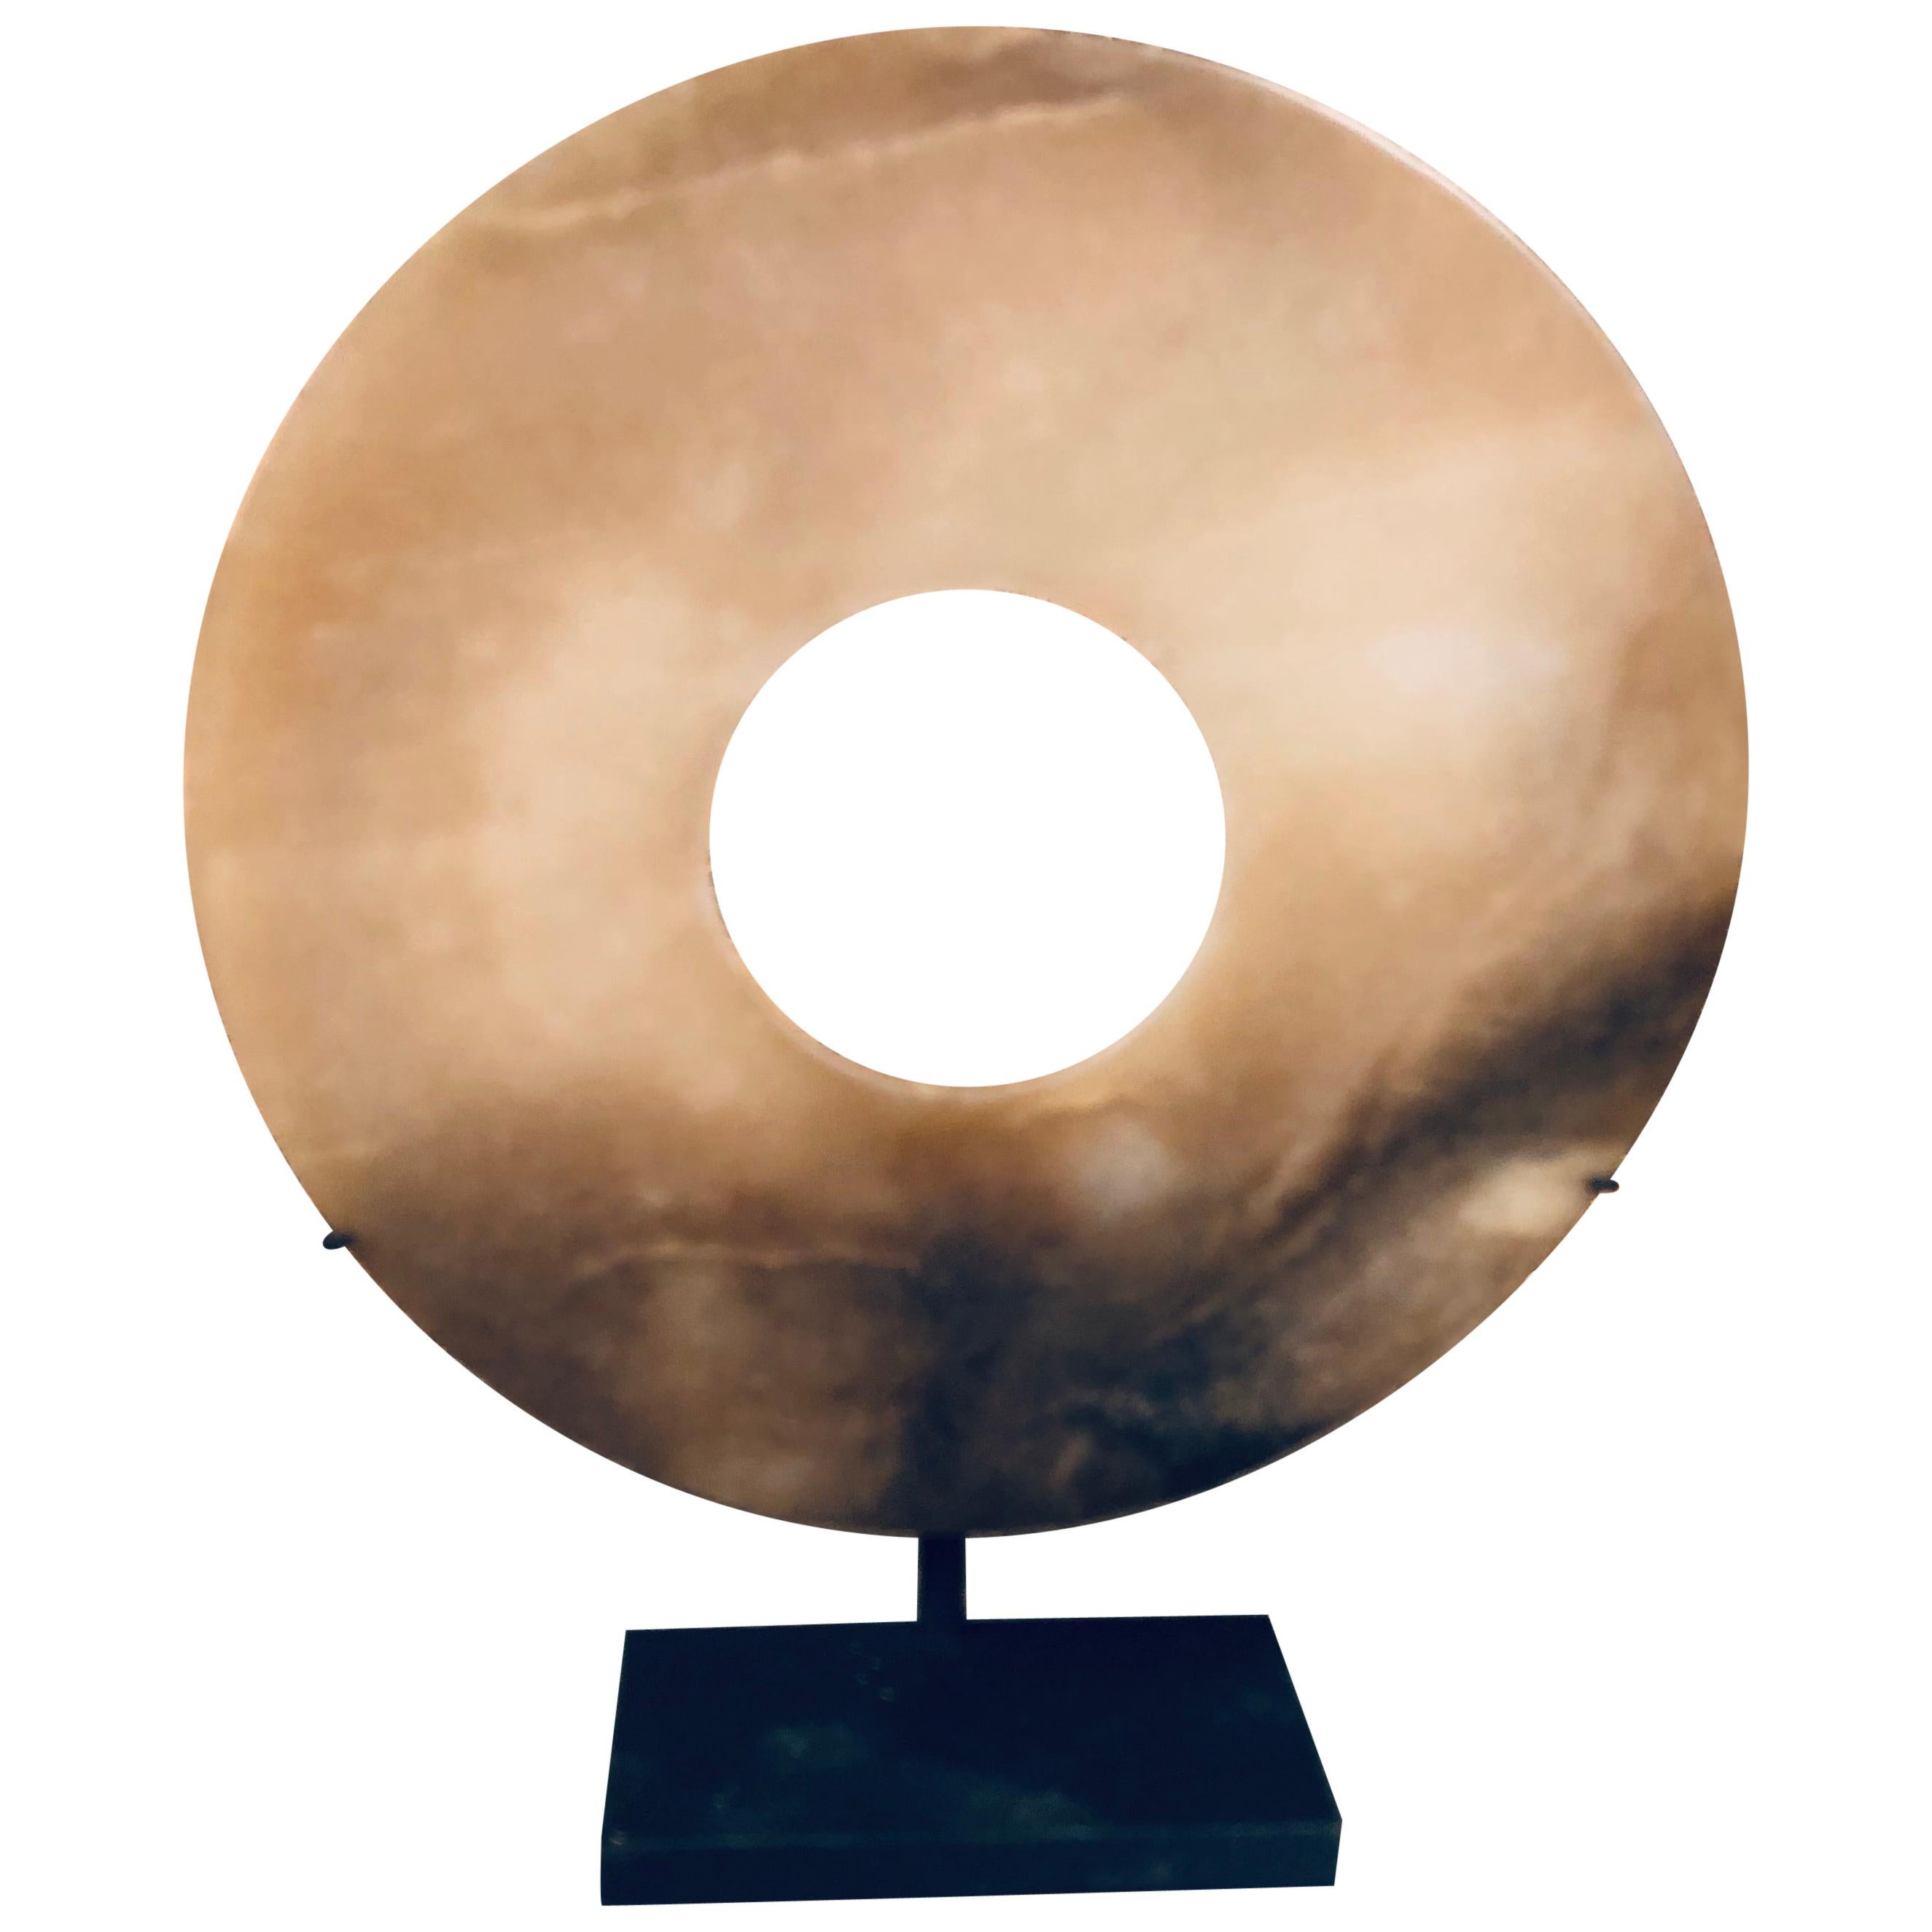 Important Ancient Superb Chinese Round Jade Bi Disc, 2000 BCE